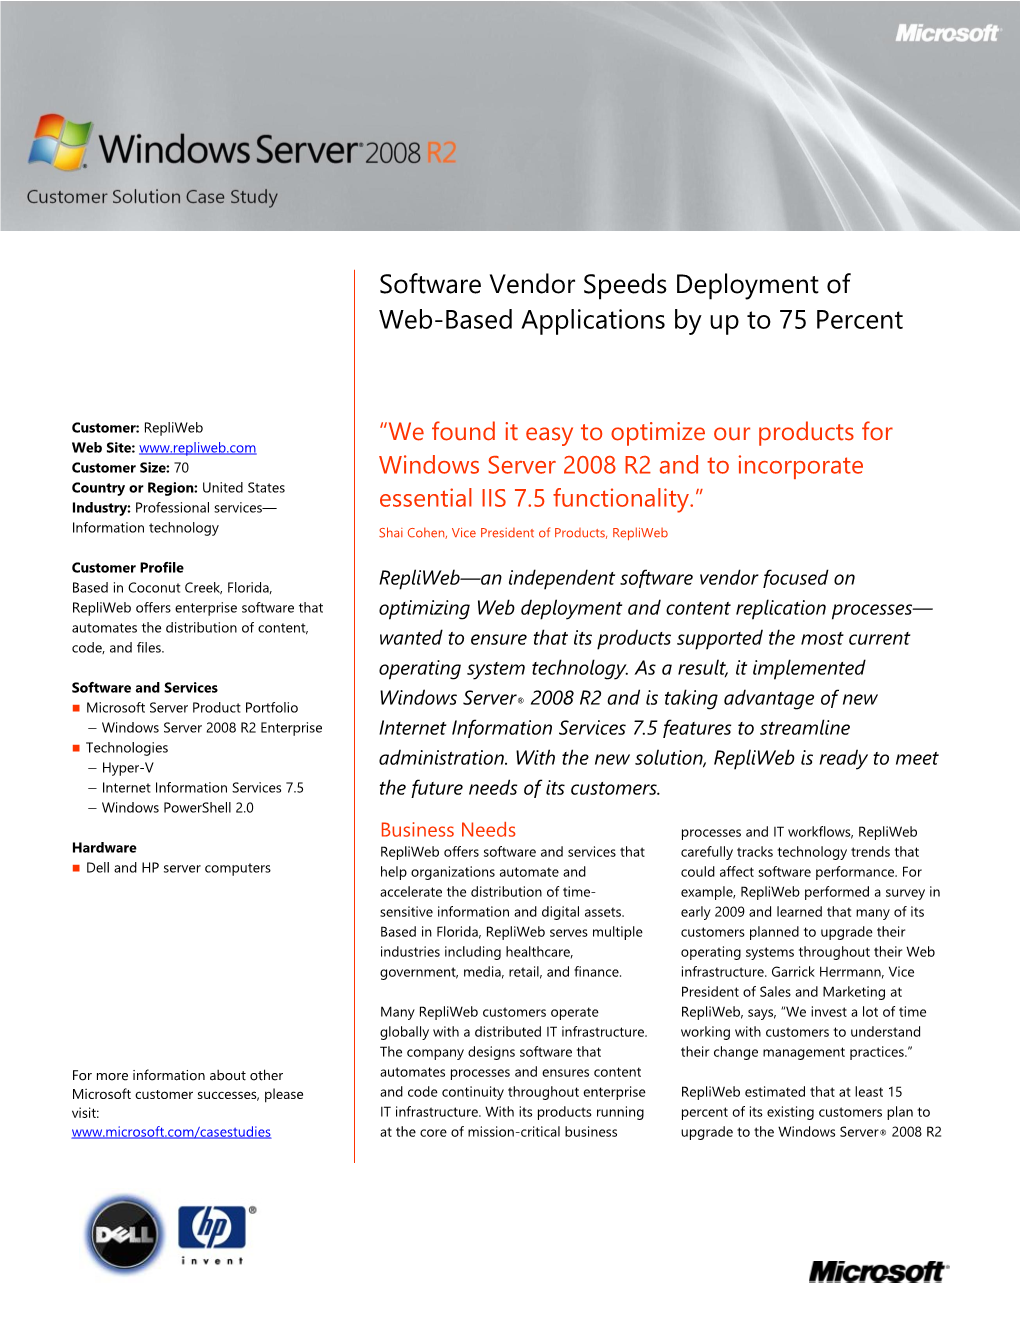 Software Vendor Speeds Deployment of Web-Based Applications by up to 75 Percent